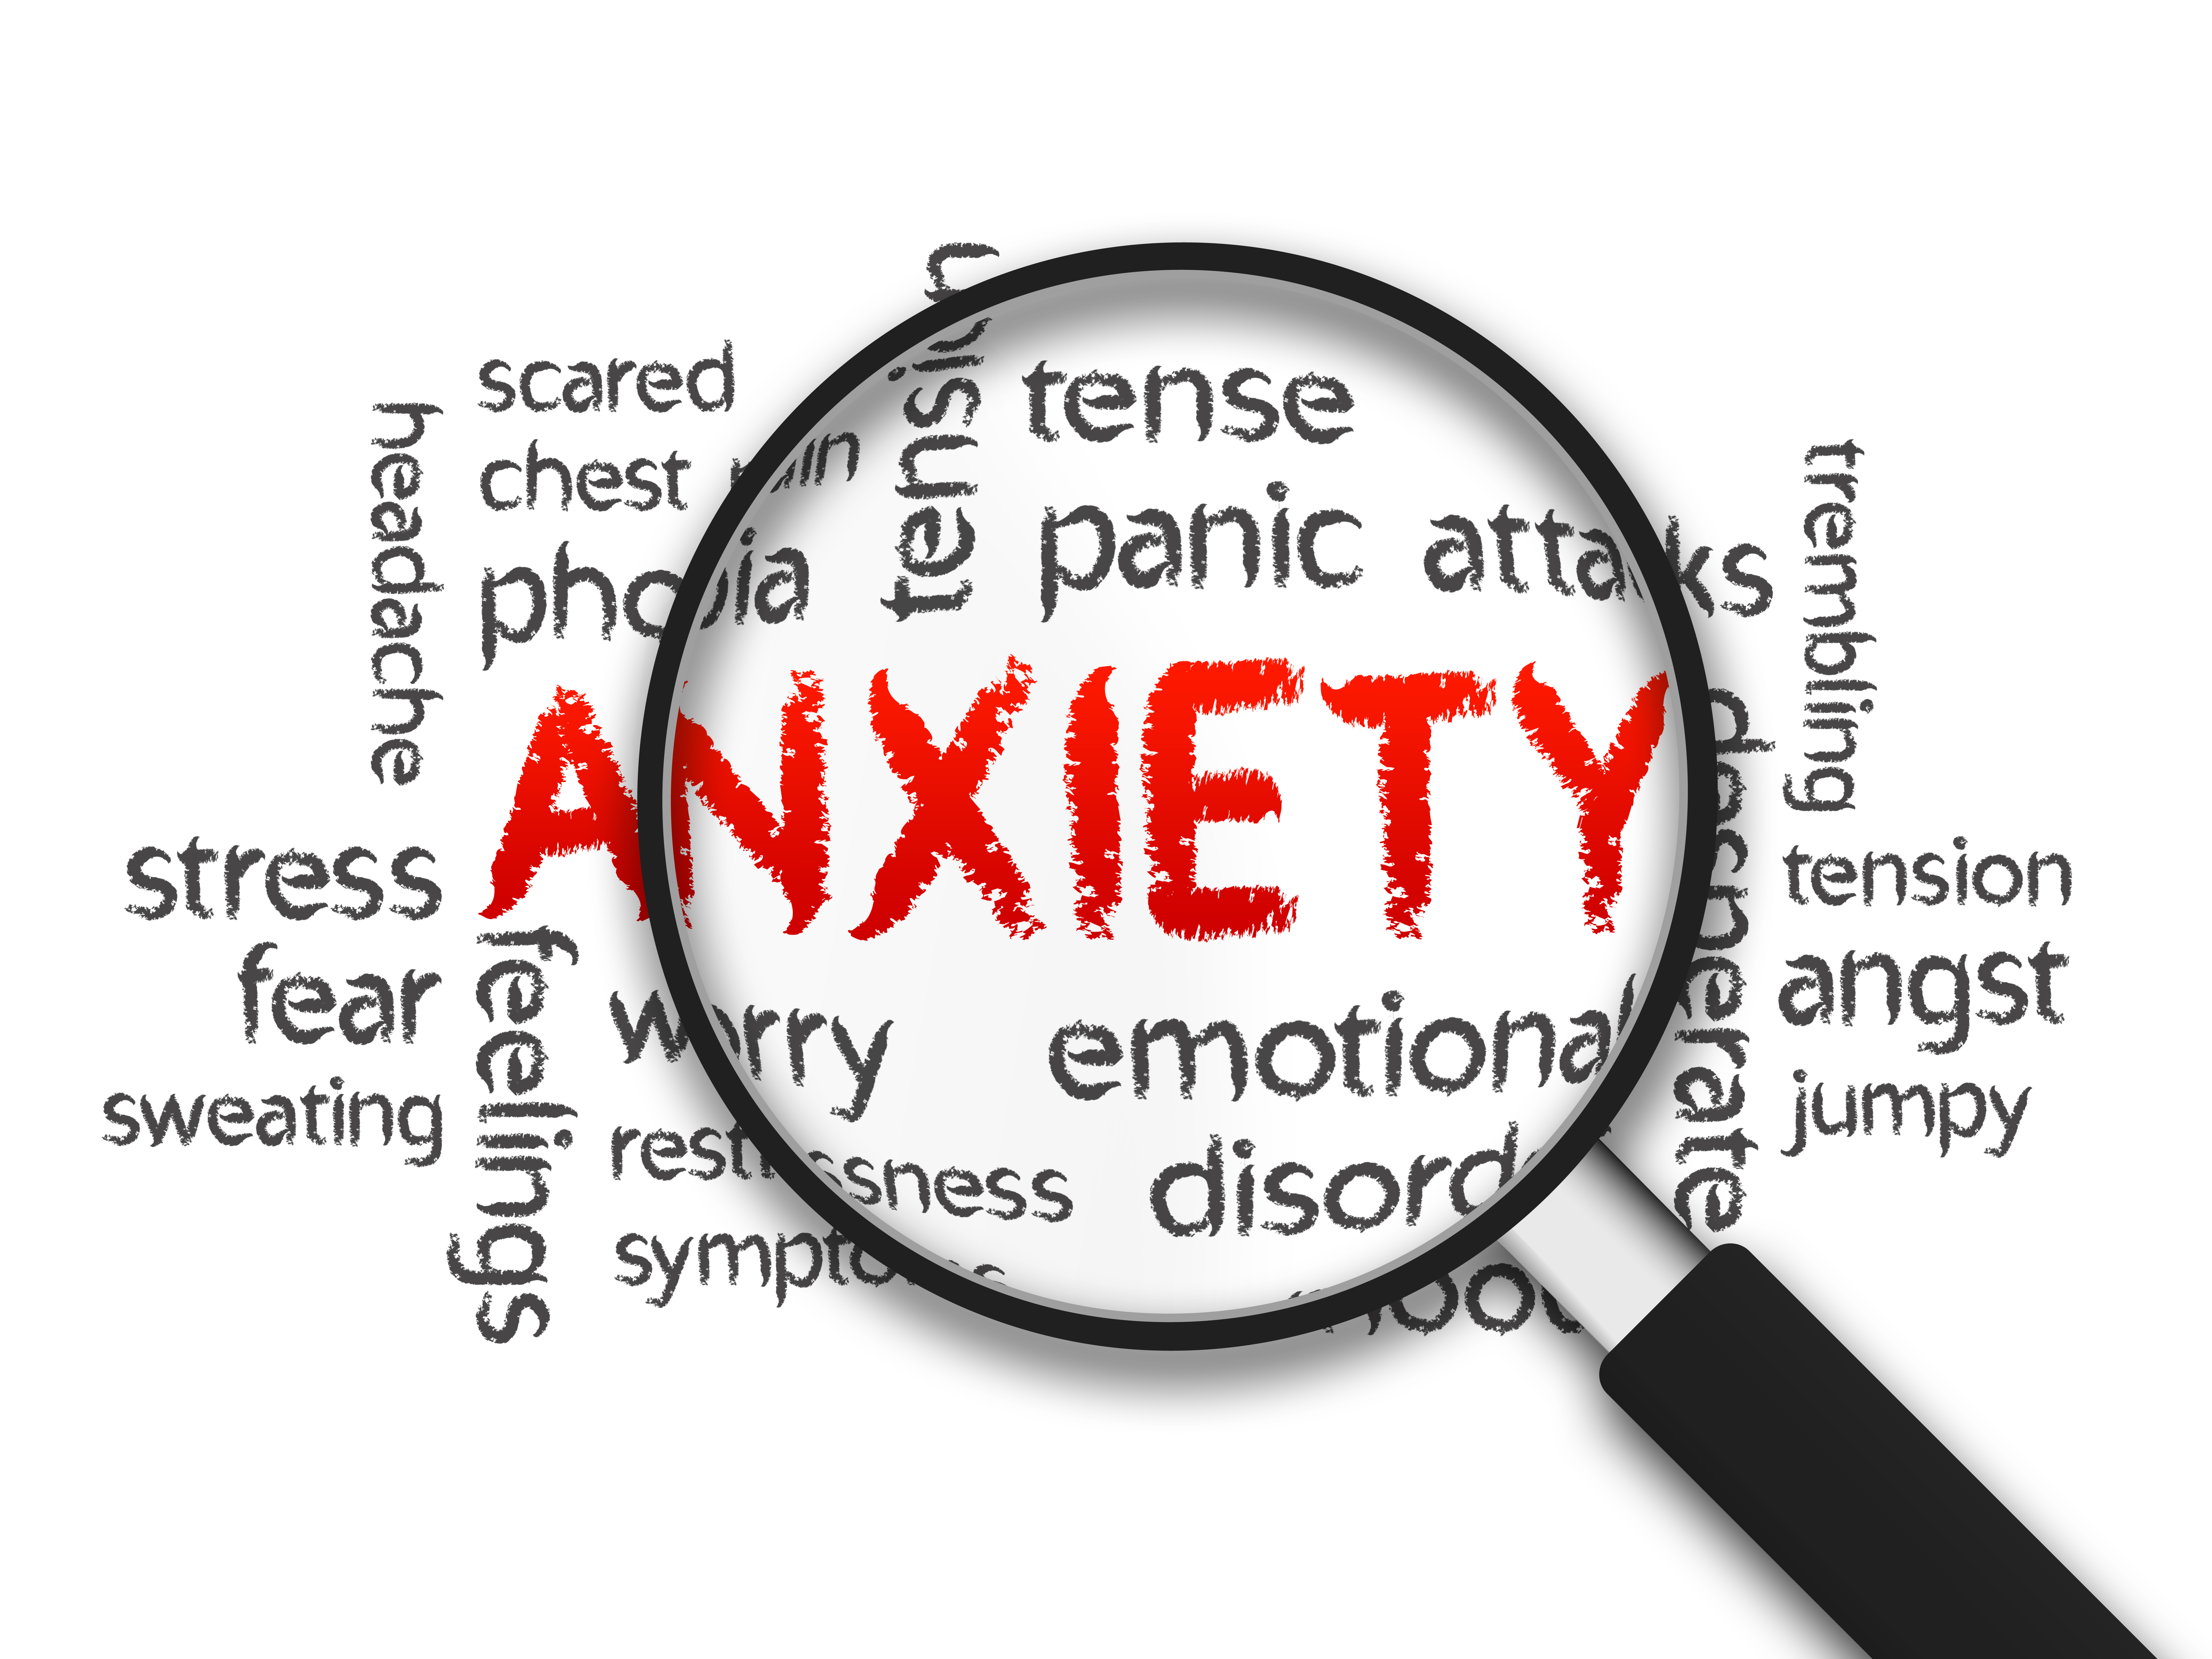 Anxiety can be cured generalized anxiety panic attacks OCD psychoanalytic psychotherapy